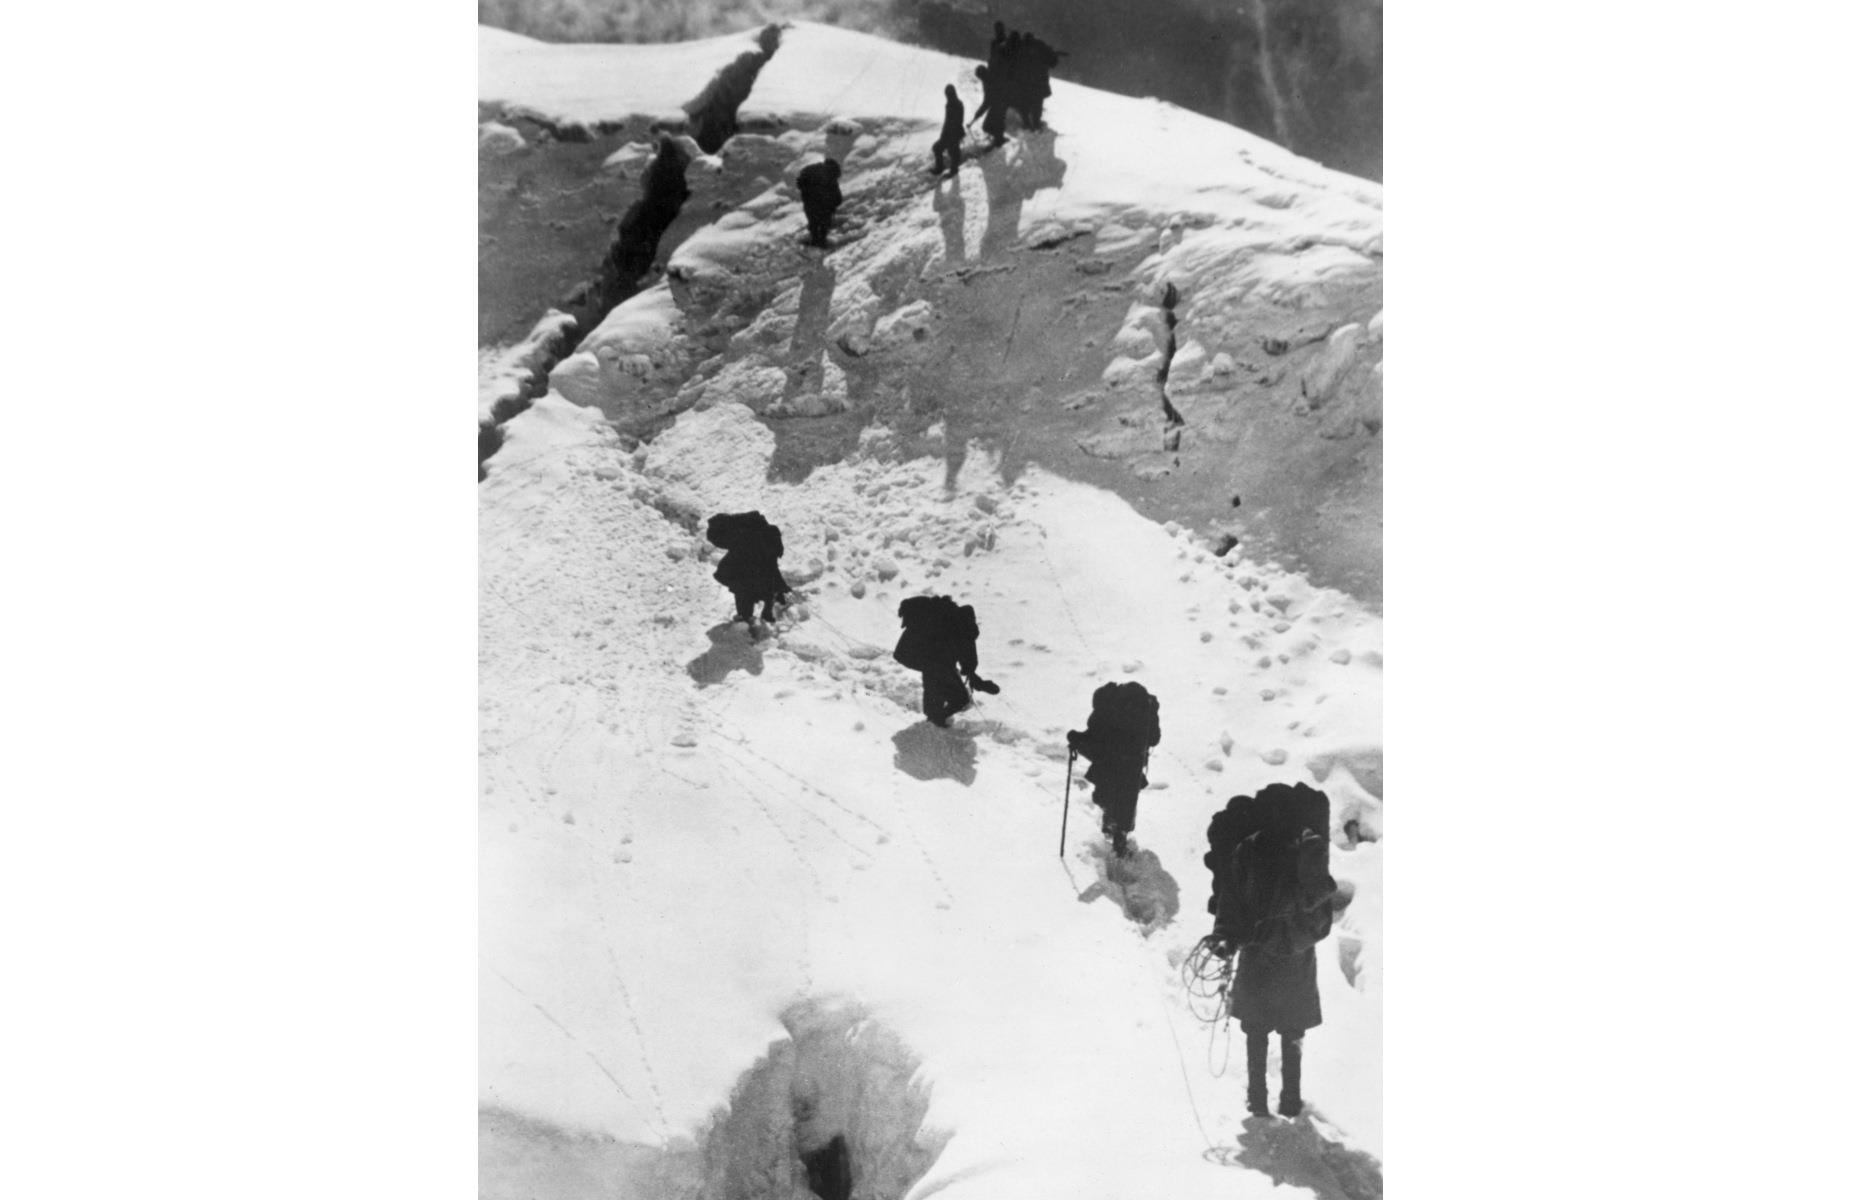 <p>Following the successful ascent by the British team, the Swiss were the next to reach the summit of Everest on 23 May 1956. Then on 1 May 1963, James W. Whittaker and Nawang Gombu Sherpa (the nephew of Tenzing Norgay) reached the top as part of an American team (pictured). As well as scaling the peak, the purpose of the expedition was to research how climbers’ bodies responded to such high altitude and having a limited supply of oxygen. In 1965, India became the fourth country to reach the top, putting nine men on the summit of Everest. </p>